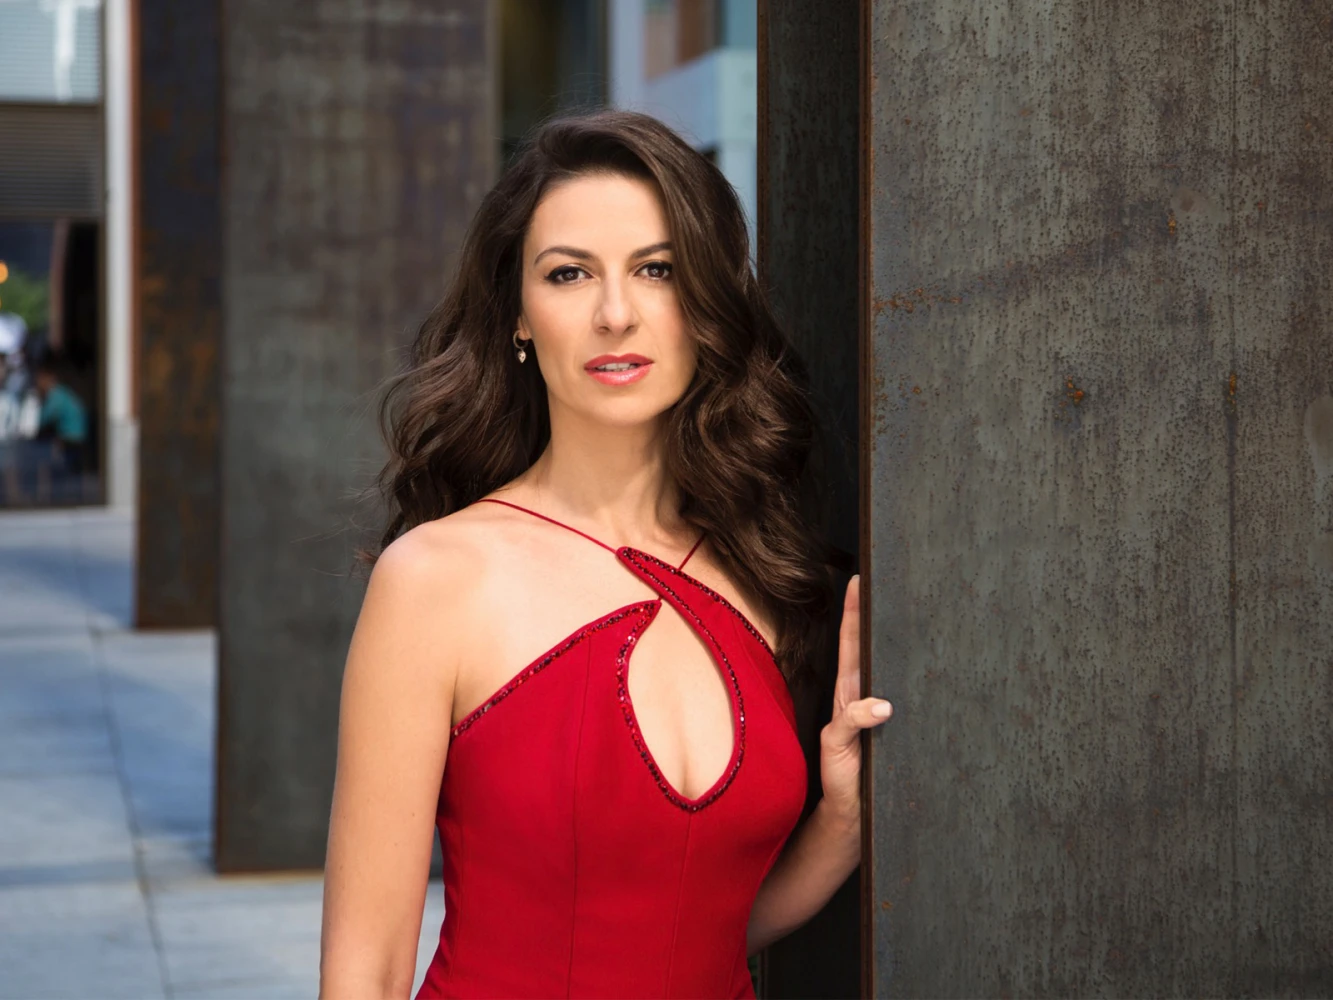 NSO: Simone Young conducts Brahms’ Symphony No. 2 | Chen Reiss sings Mozart: What to expect - 2